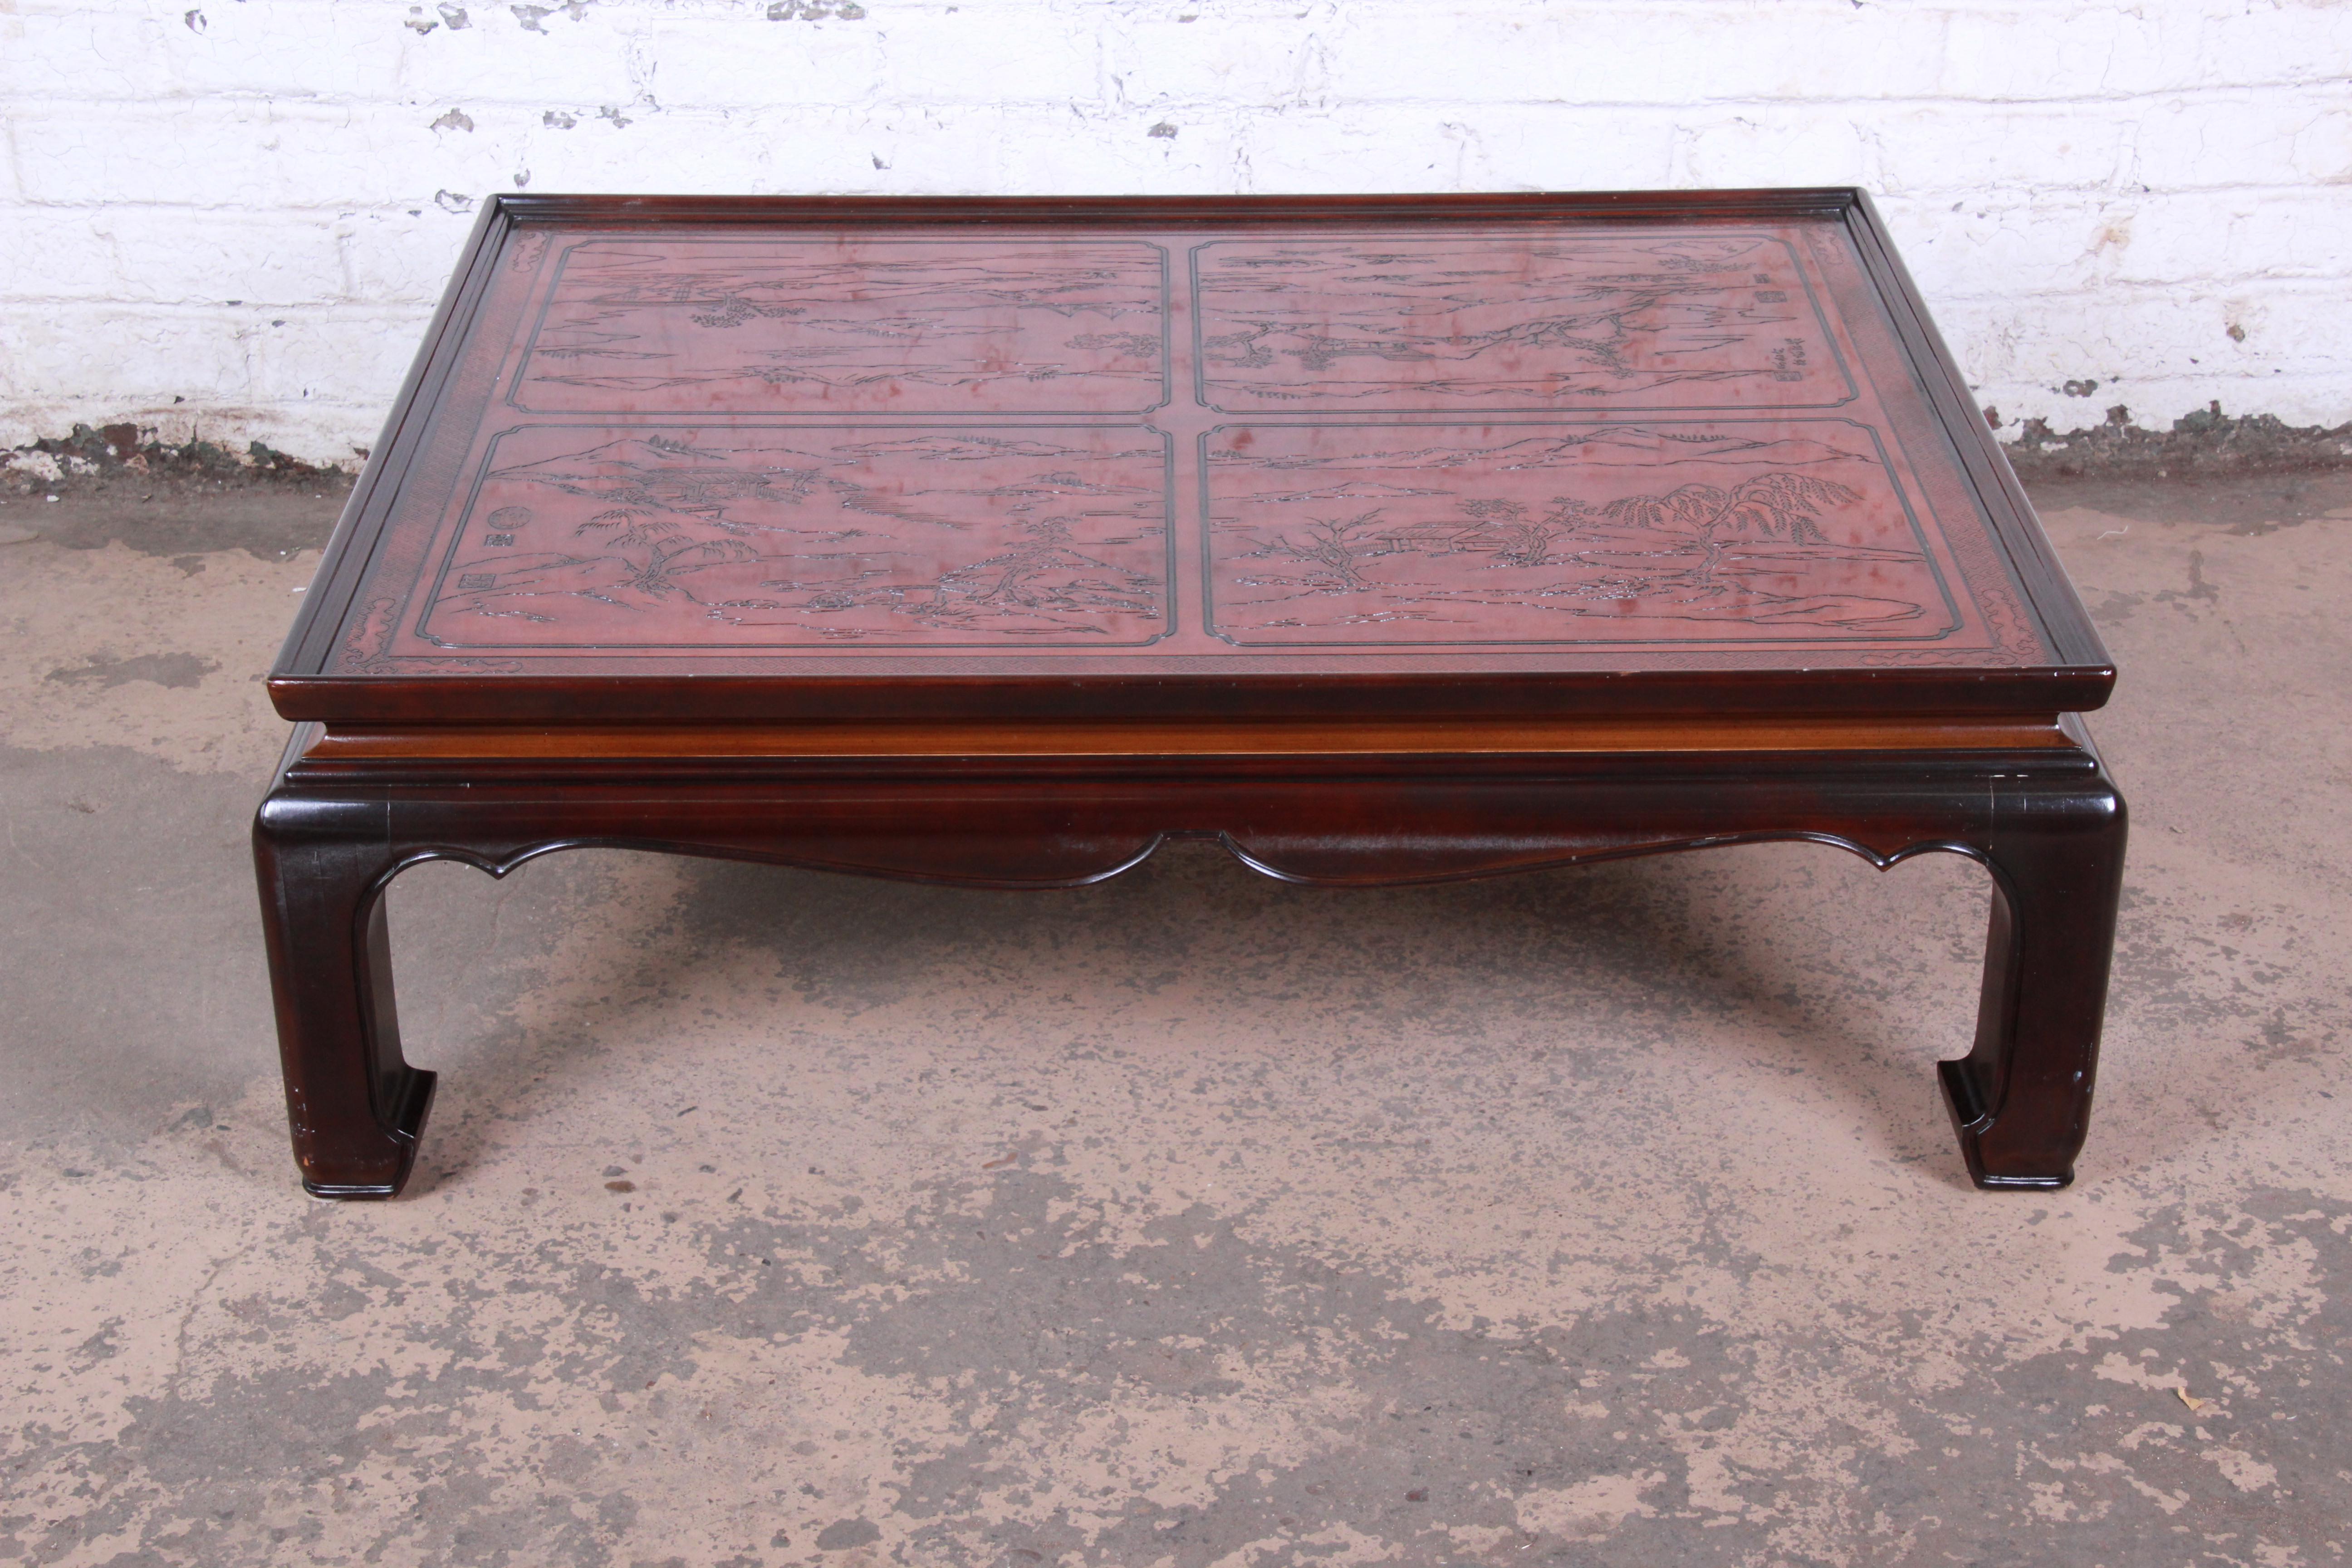 A gorgeous Hollywood Regency Chinoiserie coffee or cocktail table from the Conoisseur line by Drexel Heritage. The table features beautiful mahogany wood grain and unique carved Asian details with nature scenes. The table is in very good original